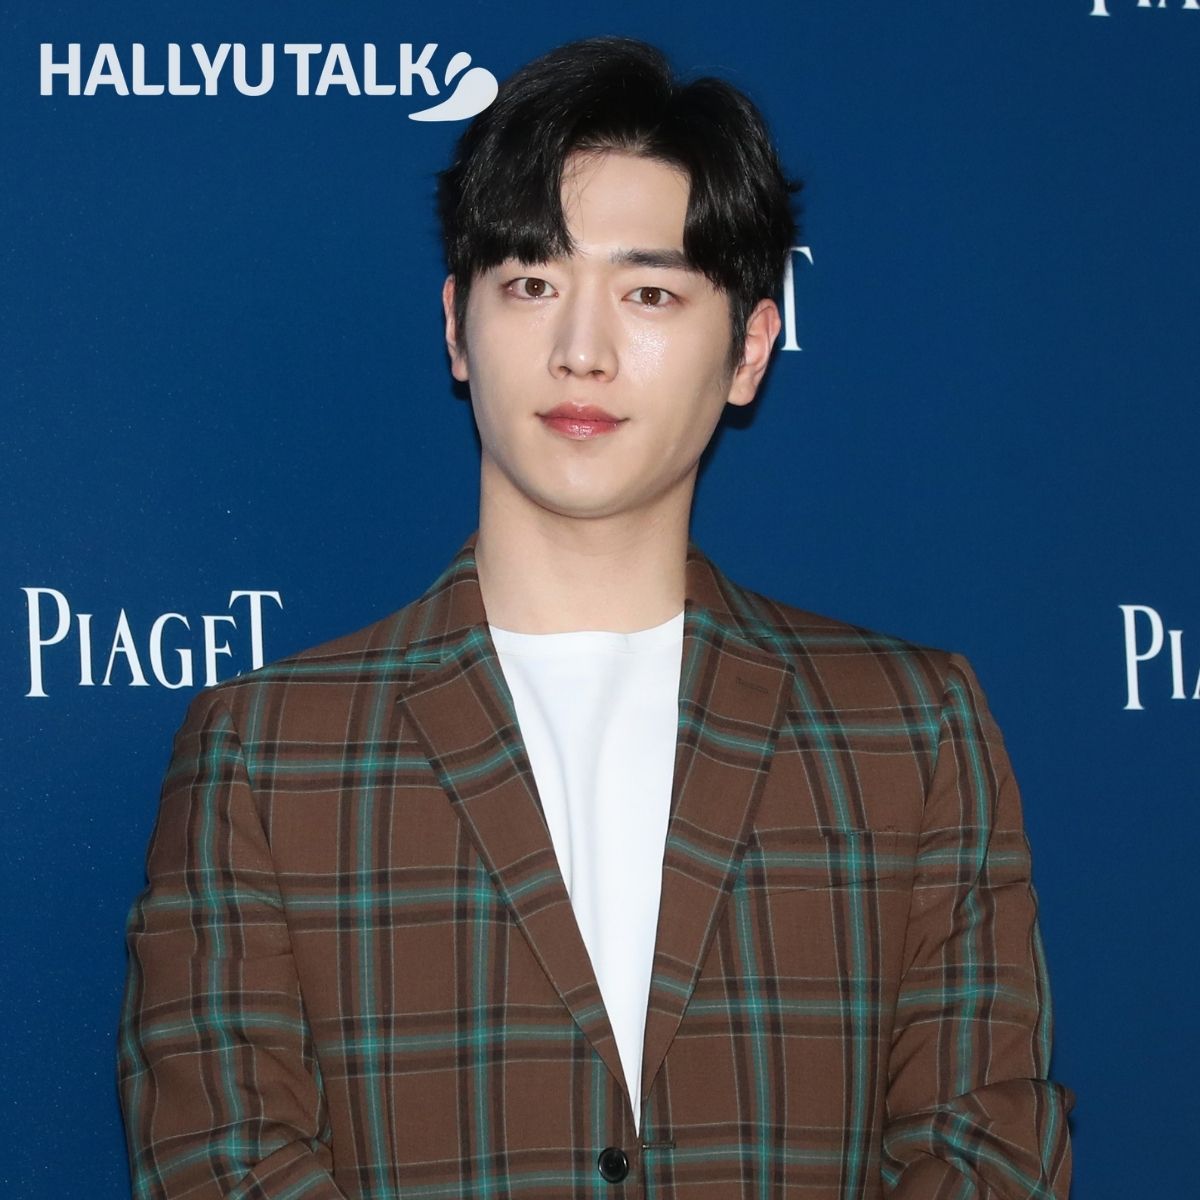 Just In: Seo Kang Joon to enlist for his mandatory military service on THIS date